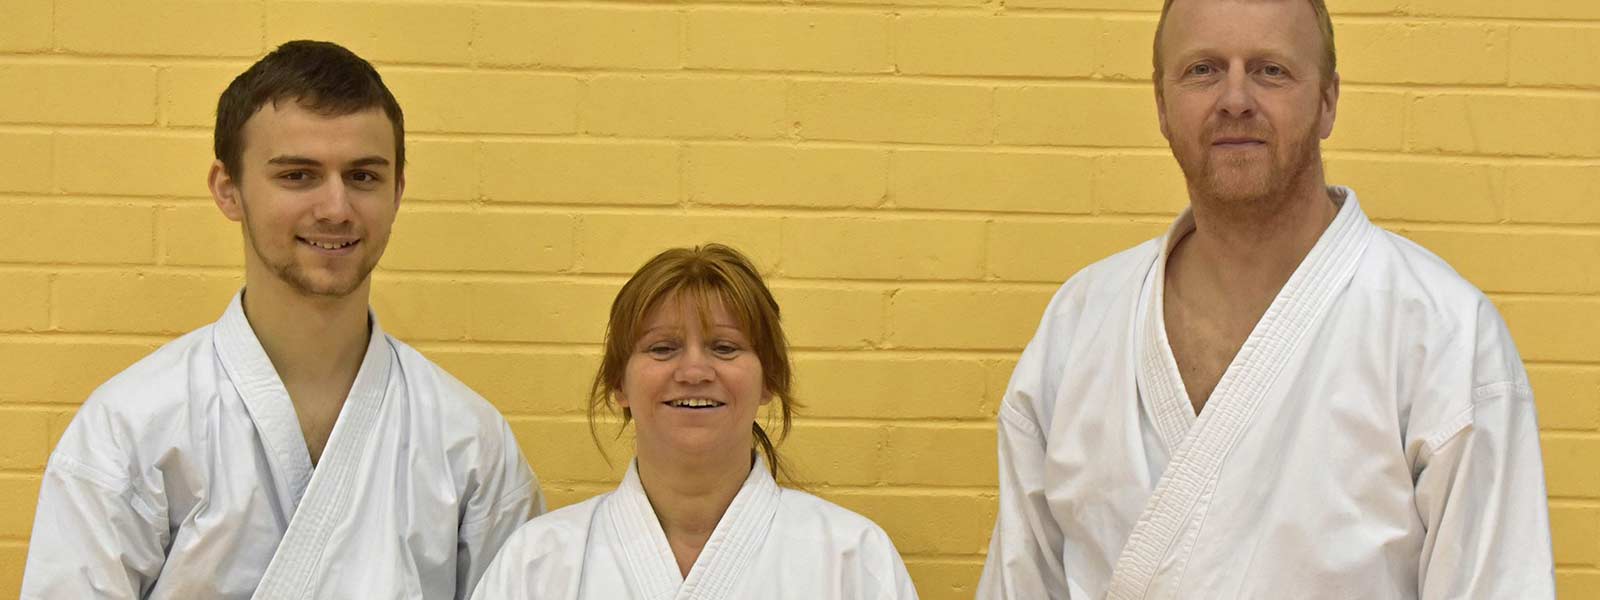 Sensei Steven Connell with his family, who he trains alongside